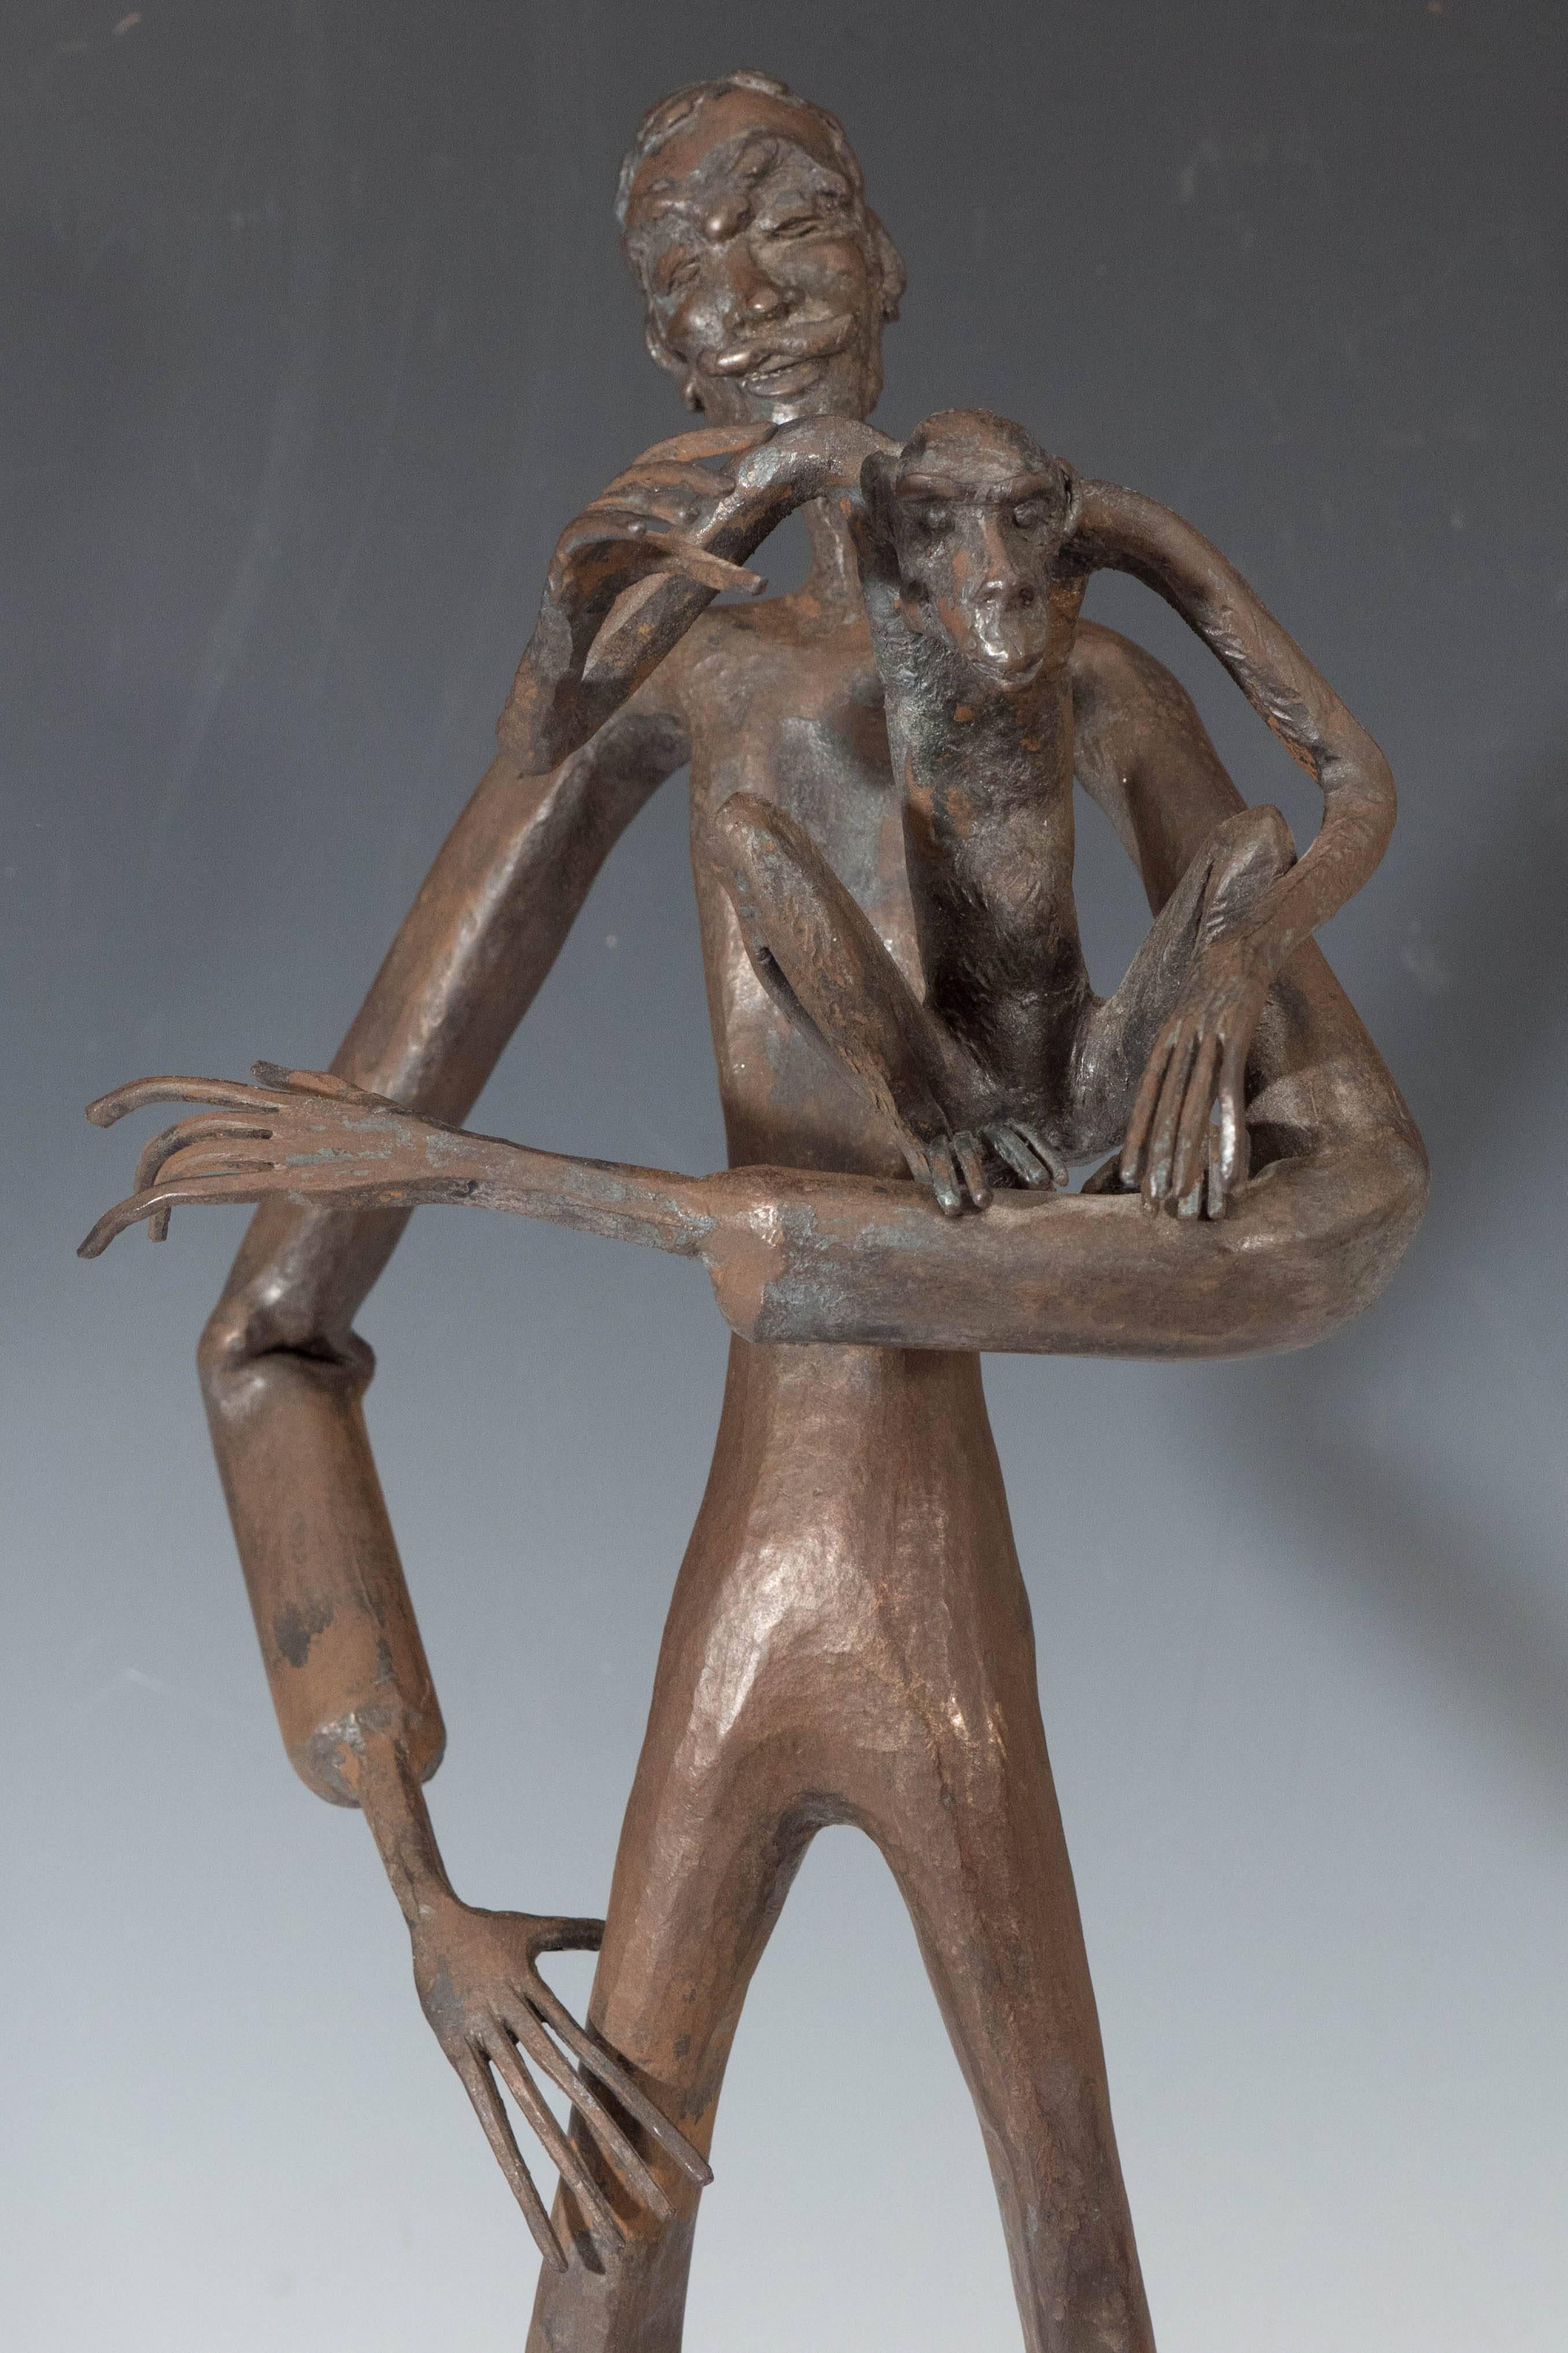 A vintage bronze sculpture, rendered in the Expressionist style, by French sculptor and ‘forgeron d'art’ (art blacksmith) Jean Marc of Cordes-sur-Ciel, created in 1961, which depicts a lanky man with a monkey on his arm. Very good condition,